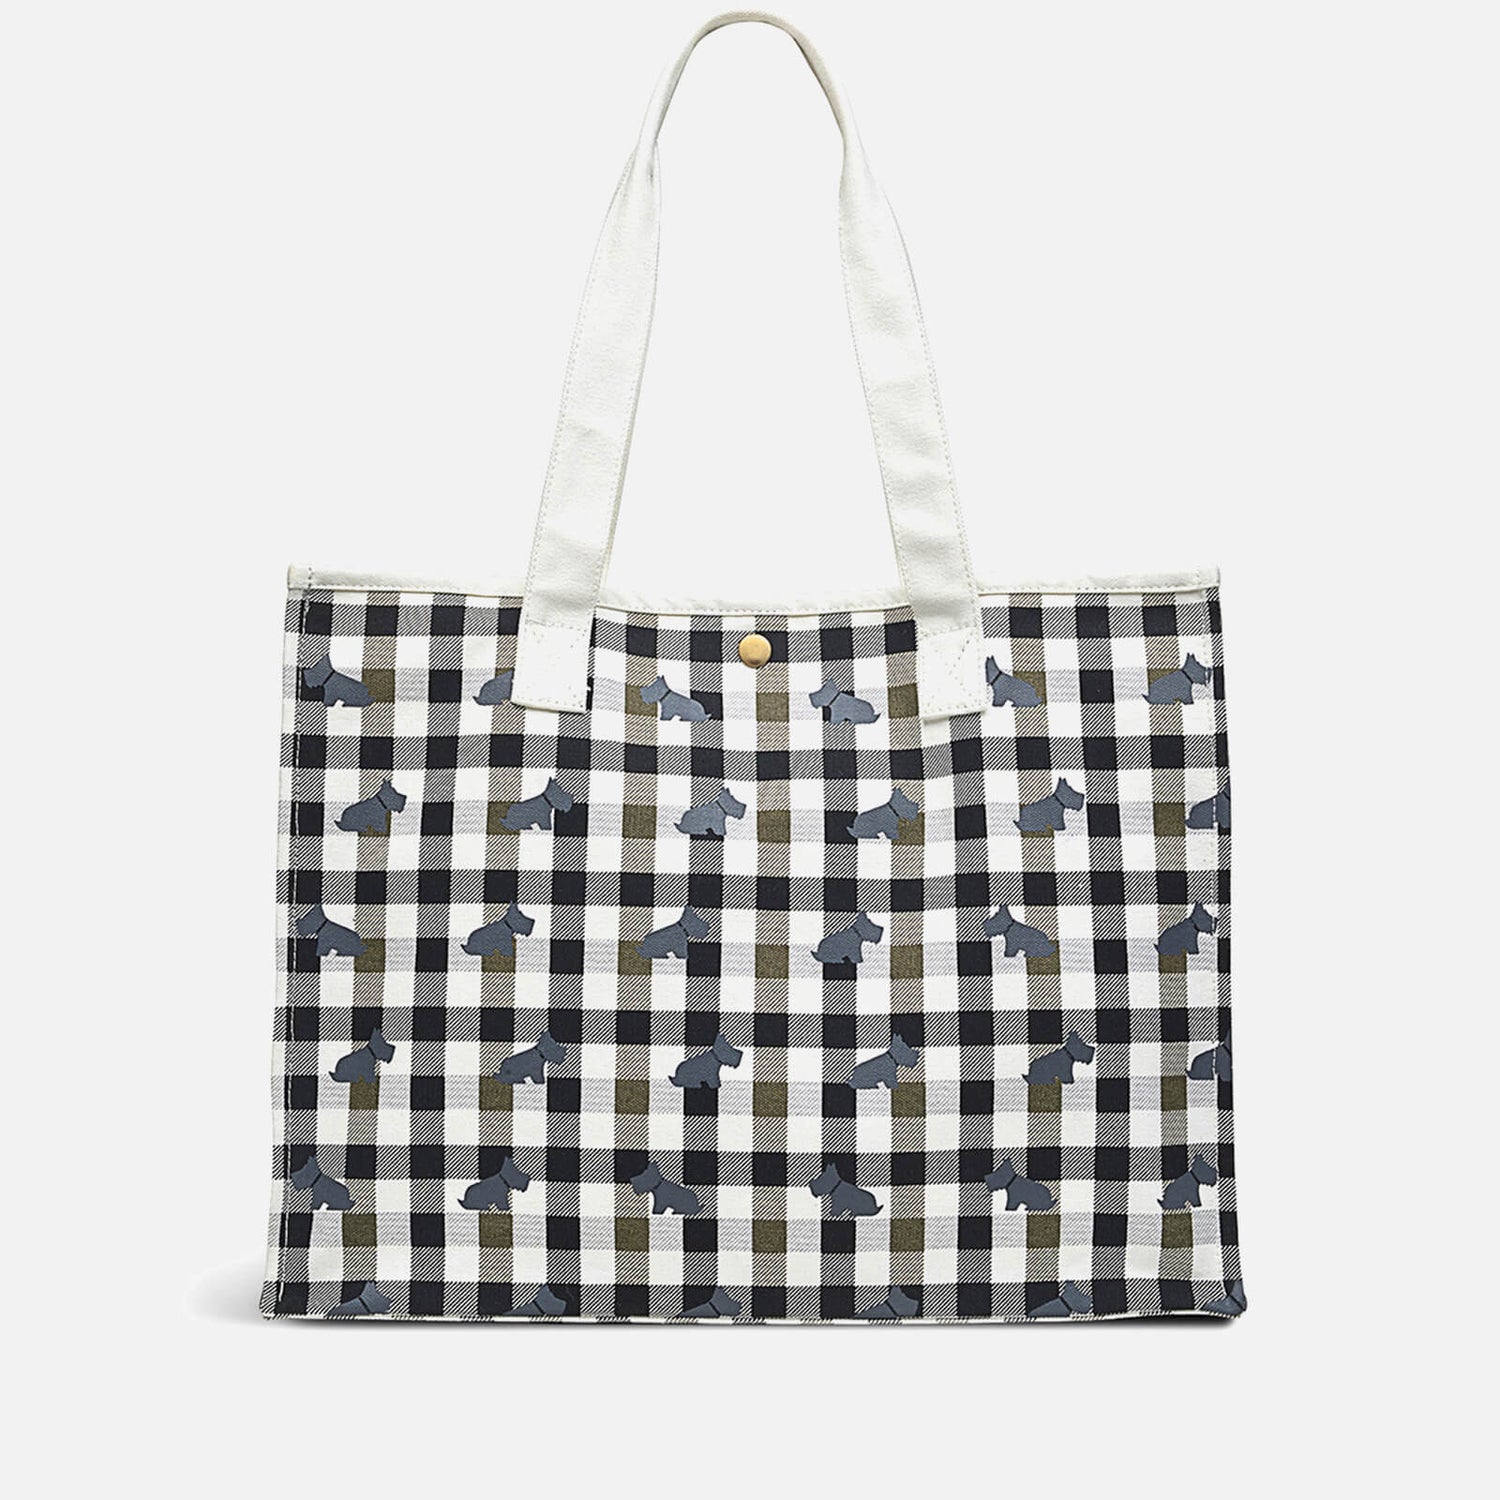 Radley Women's Checked Dog Open Top Tote Bag - Chalk